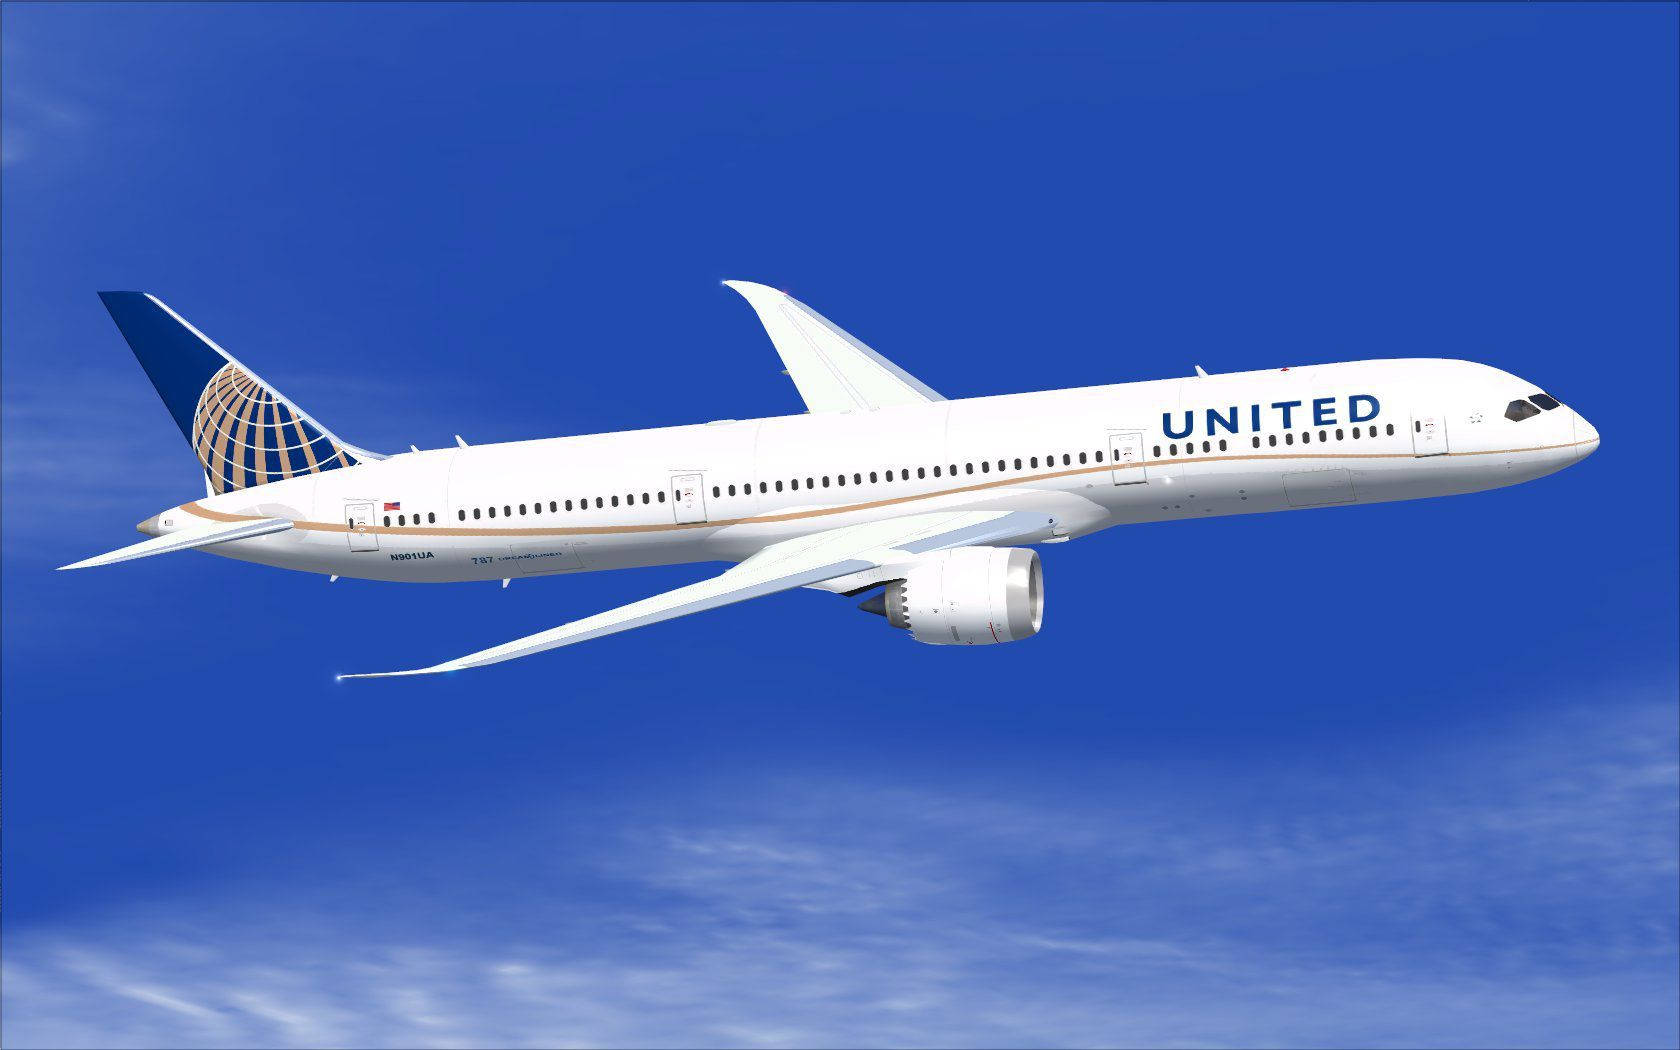 Soaring United Airlines Plane Wallpaper